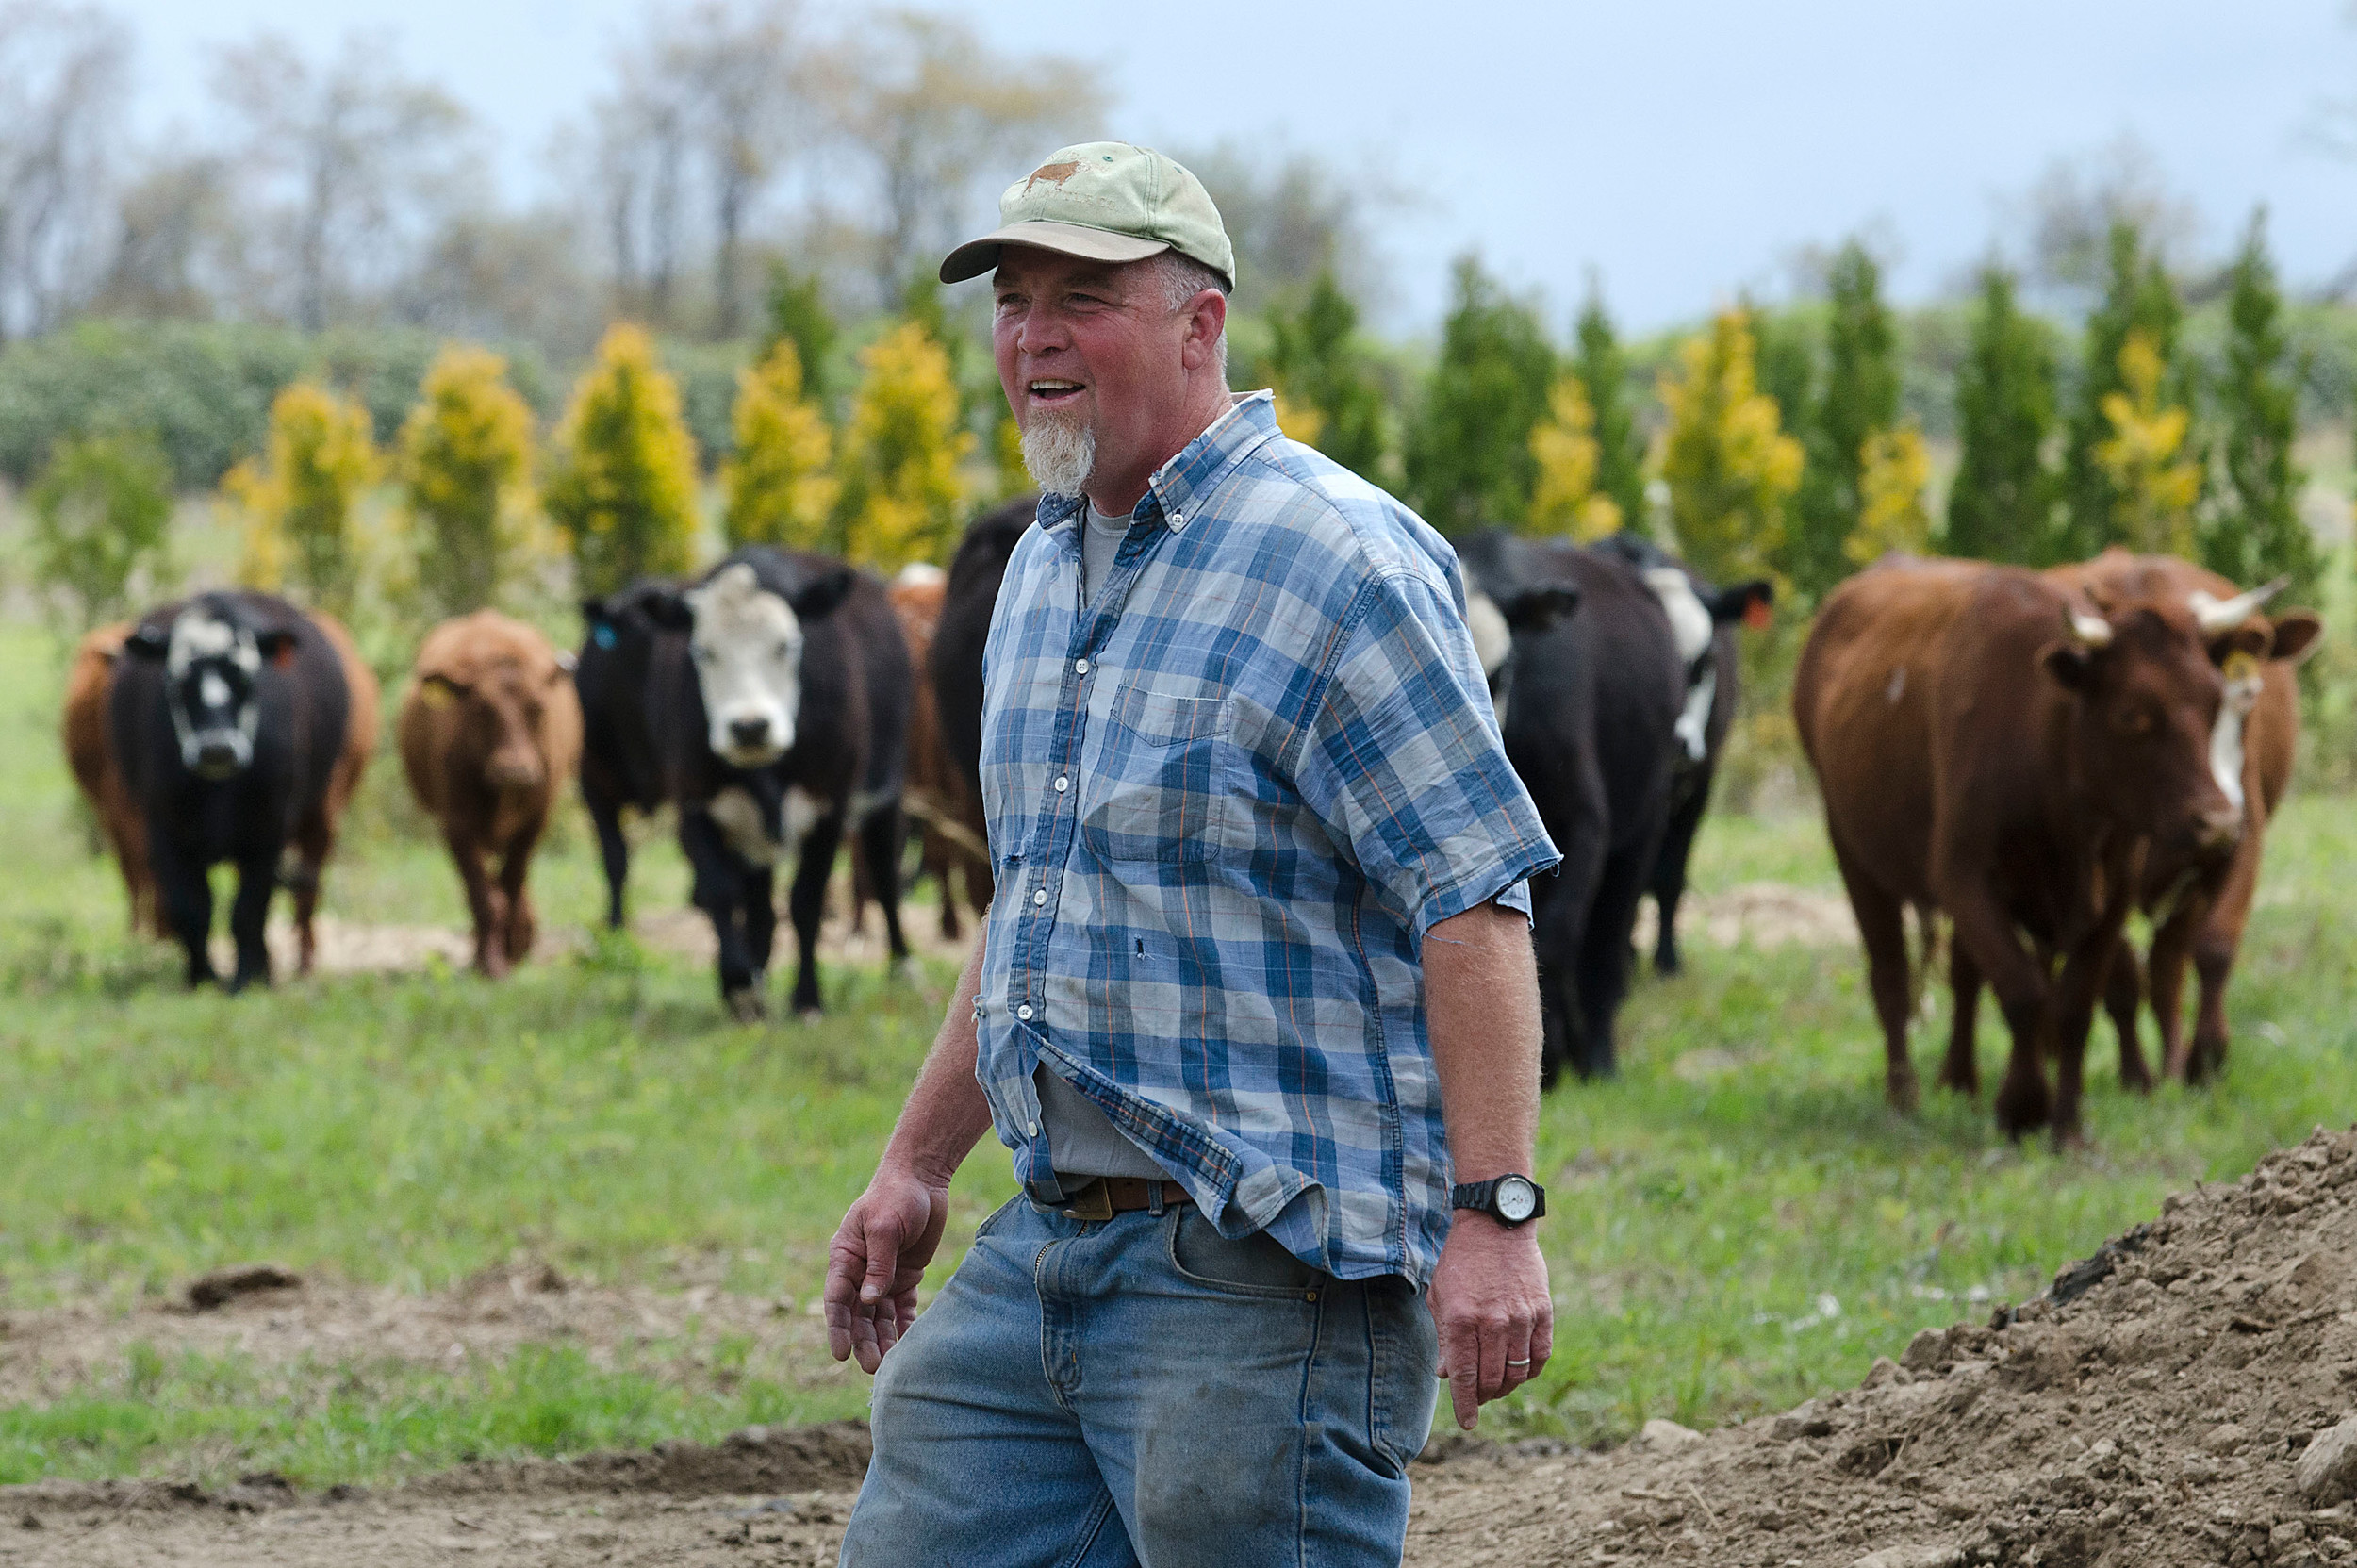 Cloverbud Ranch founder Martin Beck leads his cattle to a different portion of the farm as part of his rotational grazing plan that allows for healthy soil development and plant growth. Mr. Beck raises cross-bred Angus, Devon and Hereford cattle for his New England Grass Fed LLC.